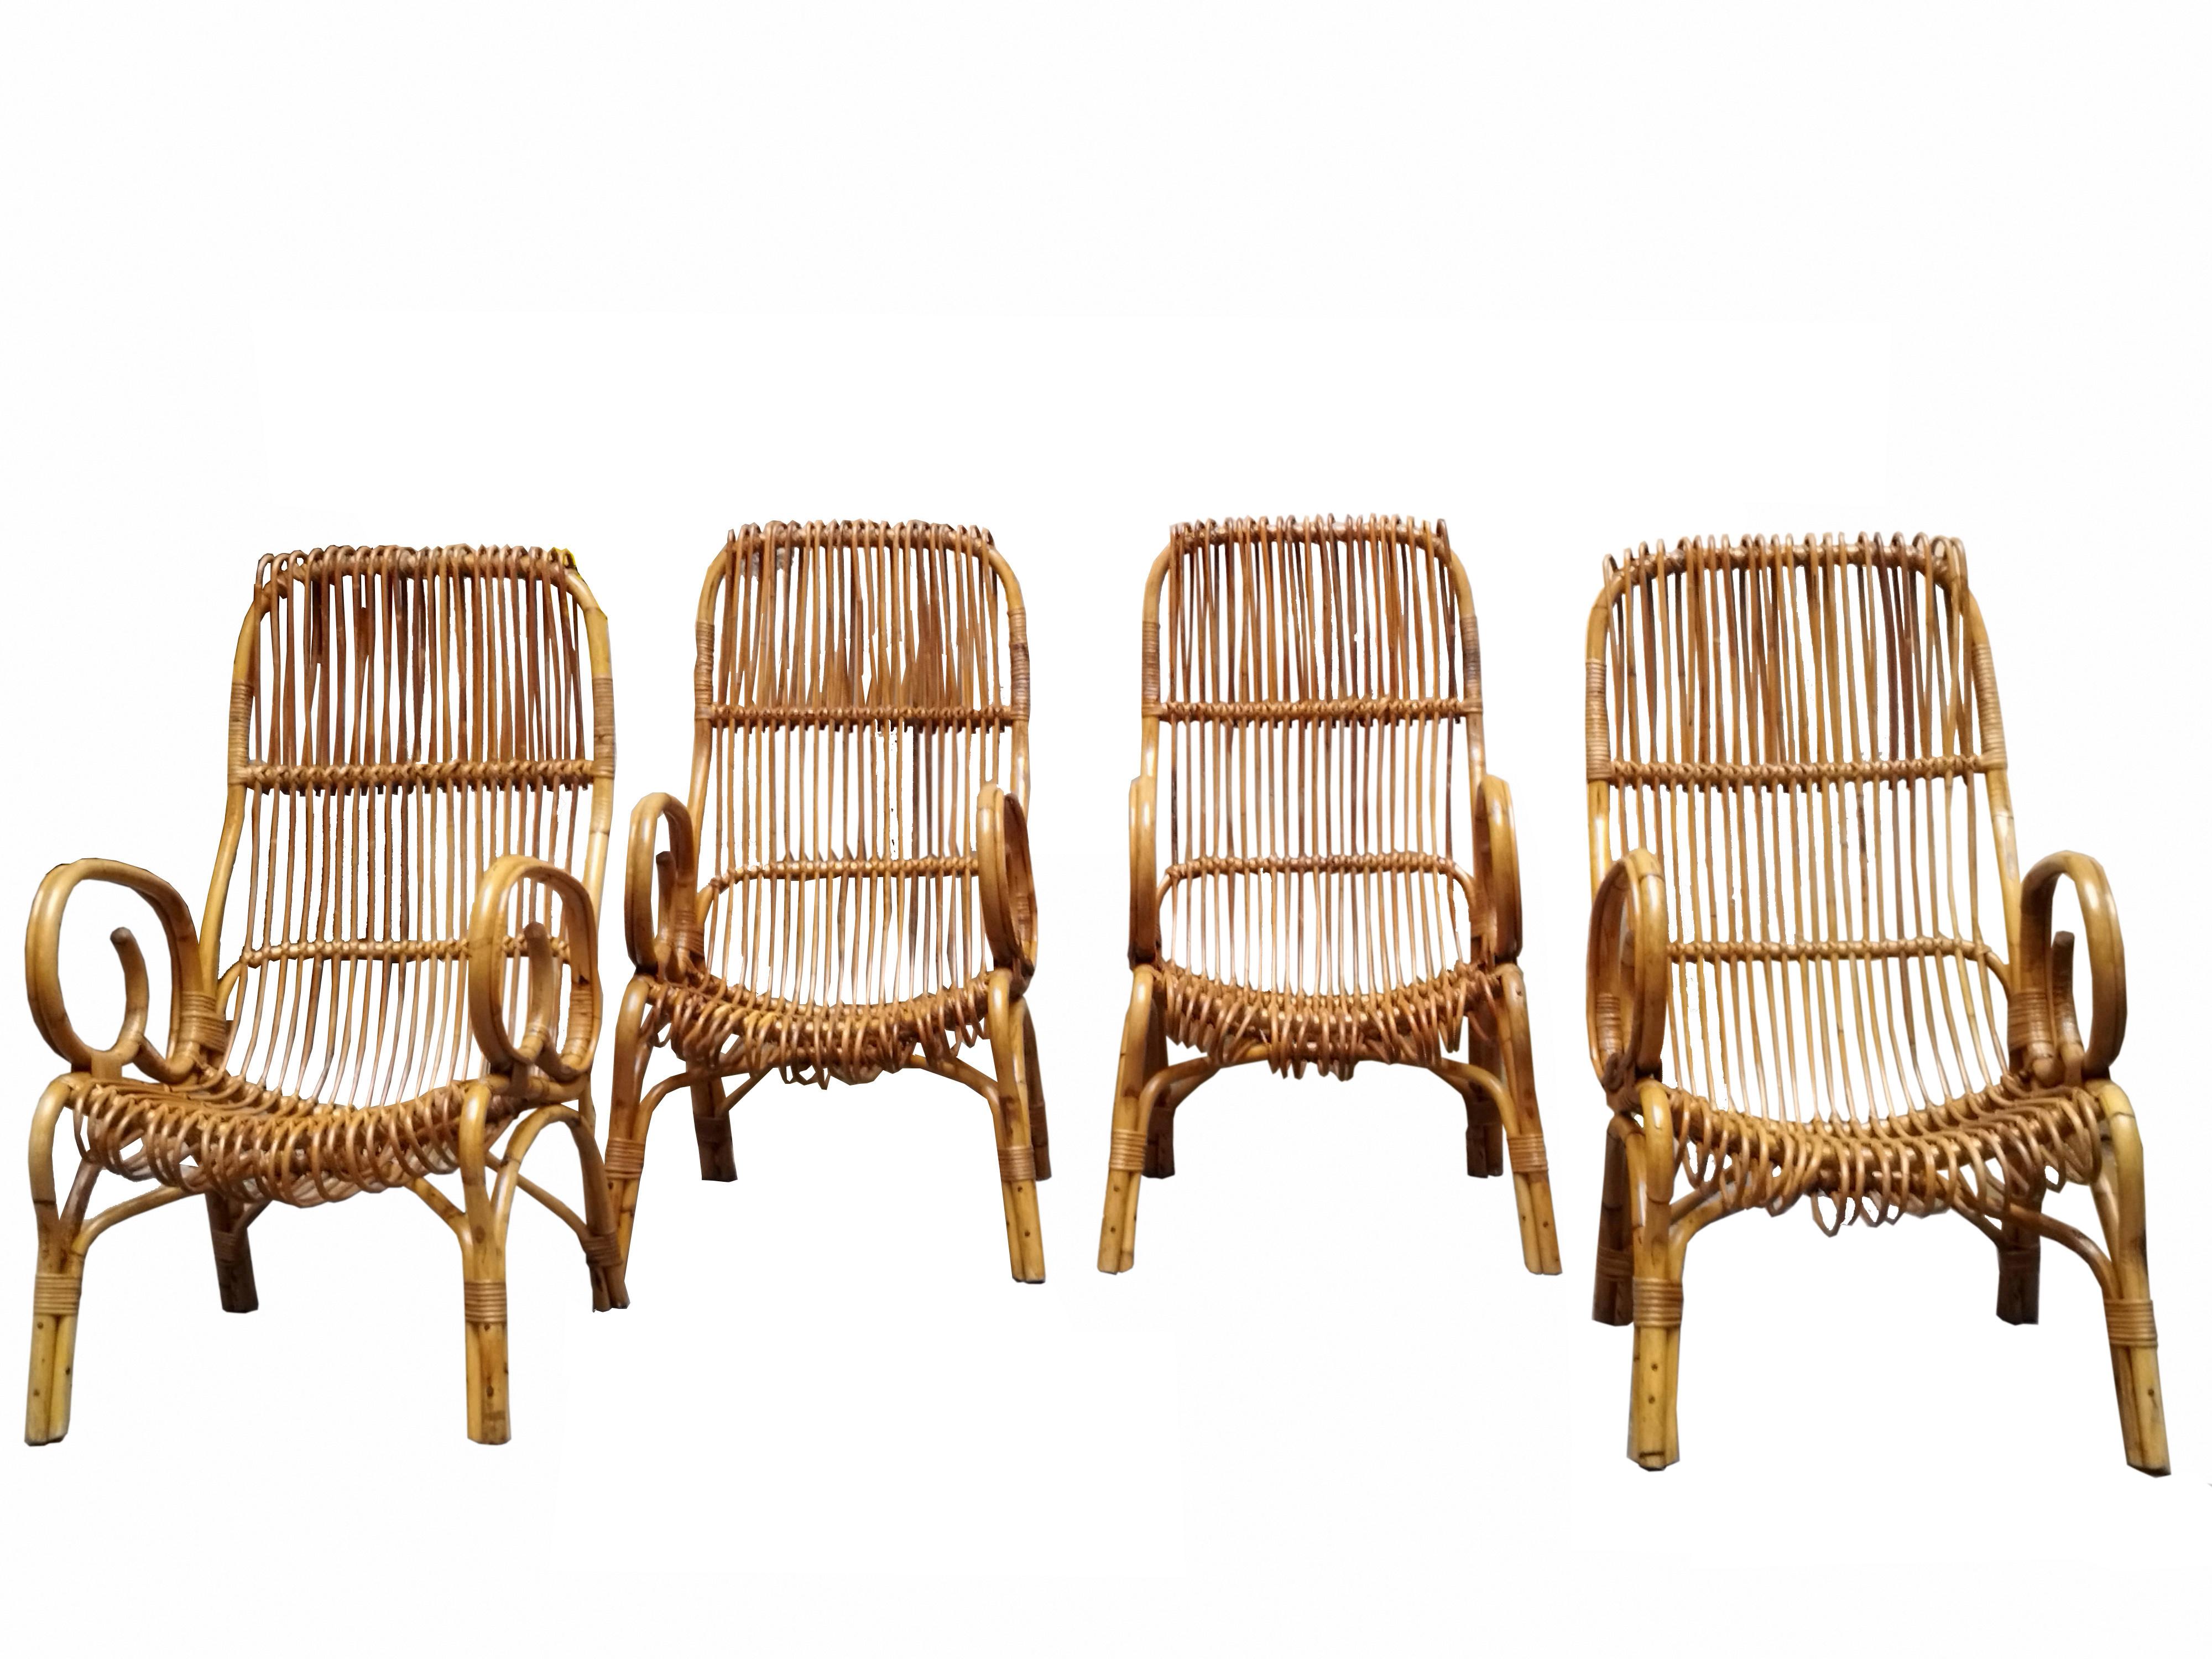 Bamboo lounge set from the 1960s attributed to designer Franco Albini, consisting of four chairs/armchairs and a round table. Finely worked curved bamboo frame. In very good condition with small natural signs of time.